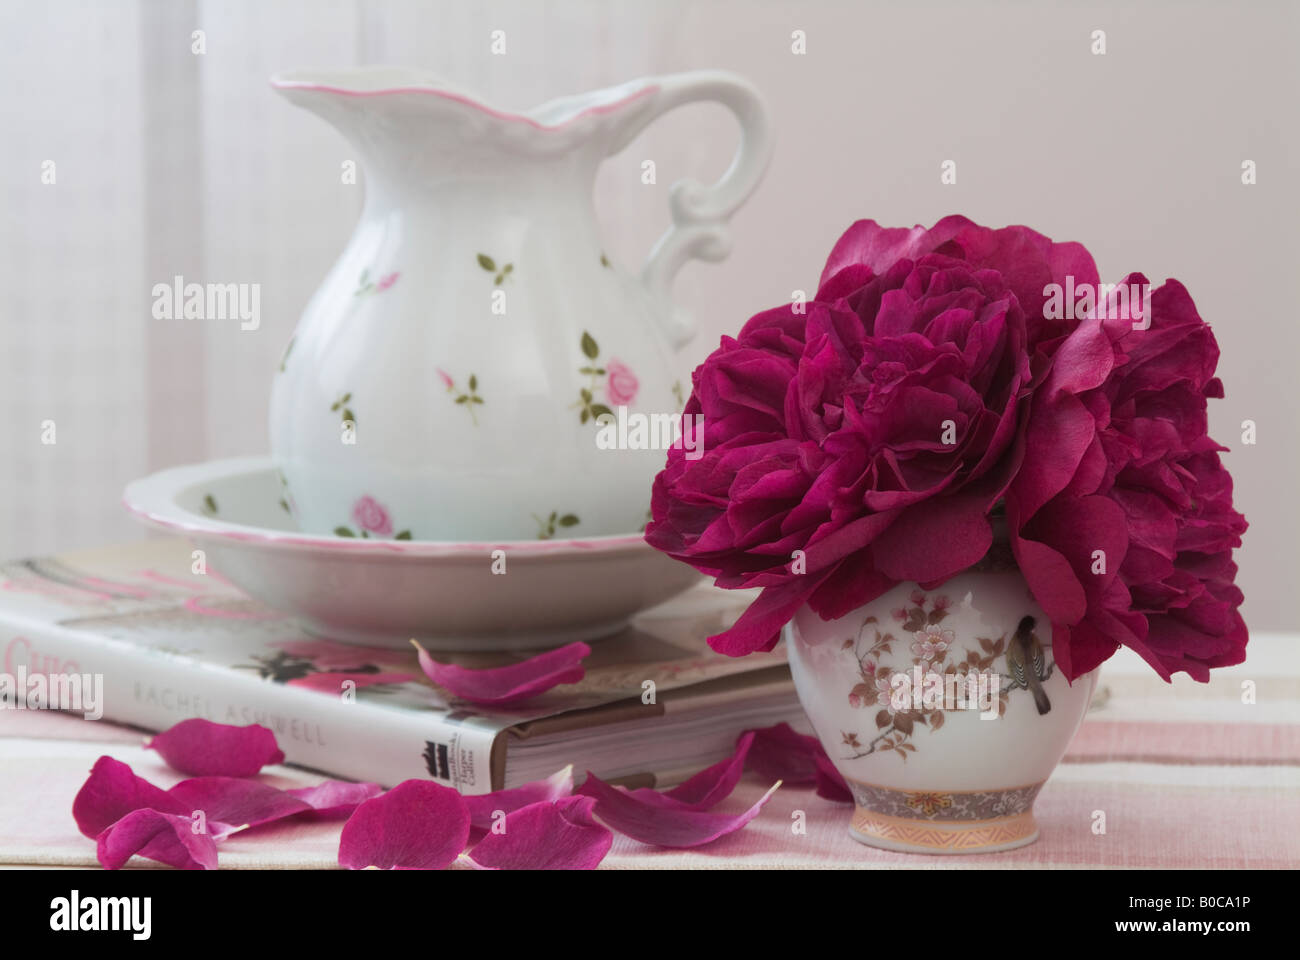 Flower Arrangement with Rose Darcy Bussell Stock Photo